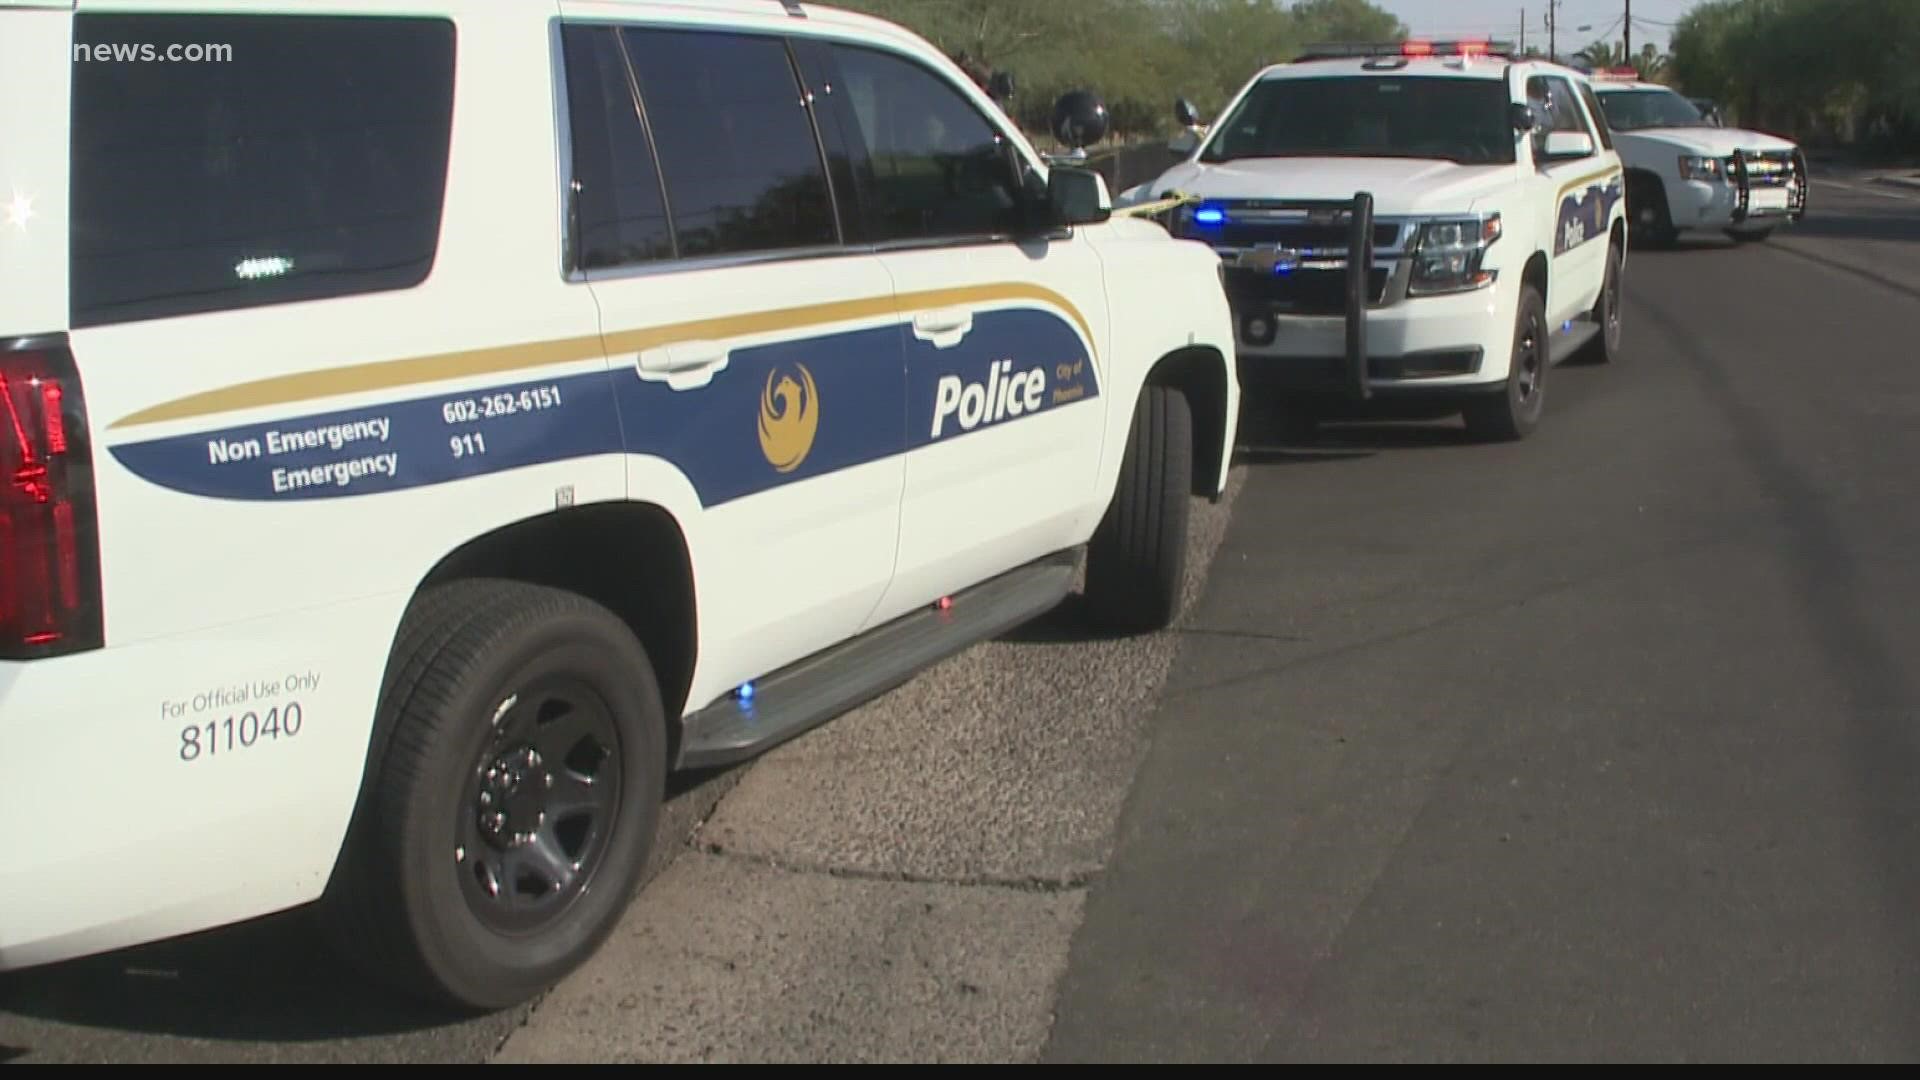 Violent crimes in the city of Phoenix are up. The Phoenix Police Department says the department is taking steps to arrest more perpatrators.